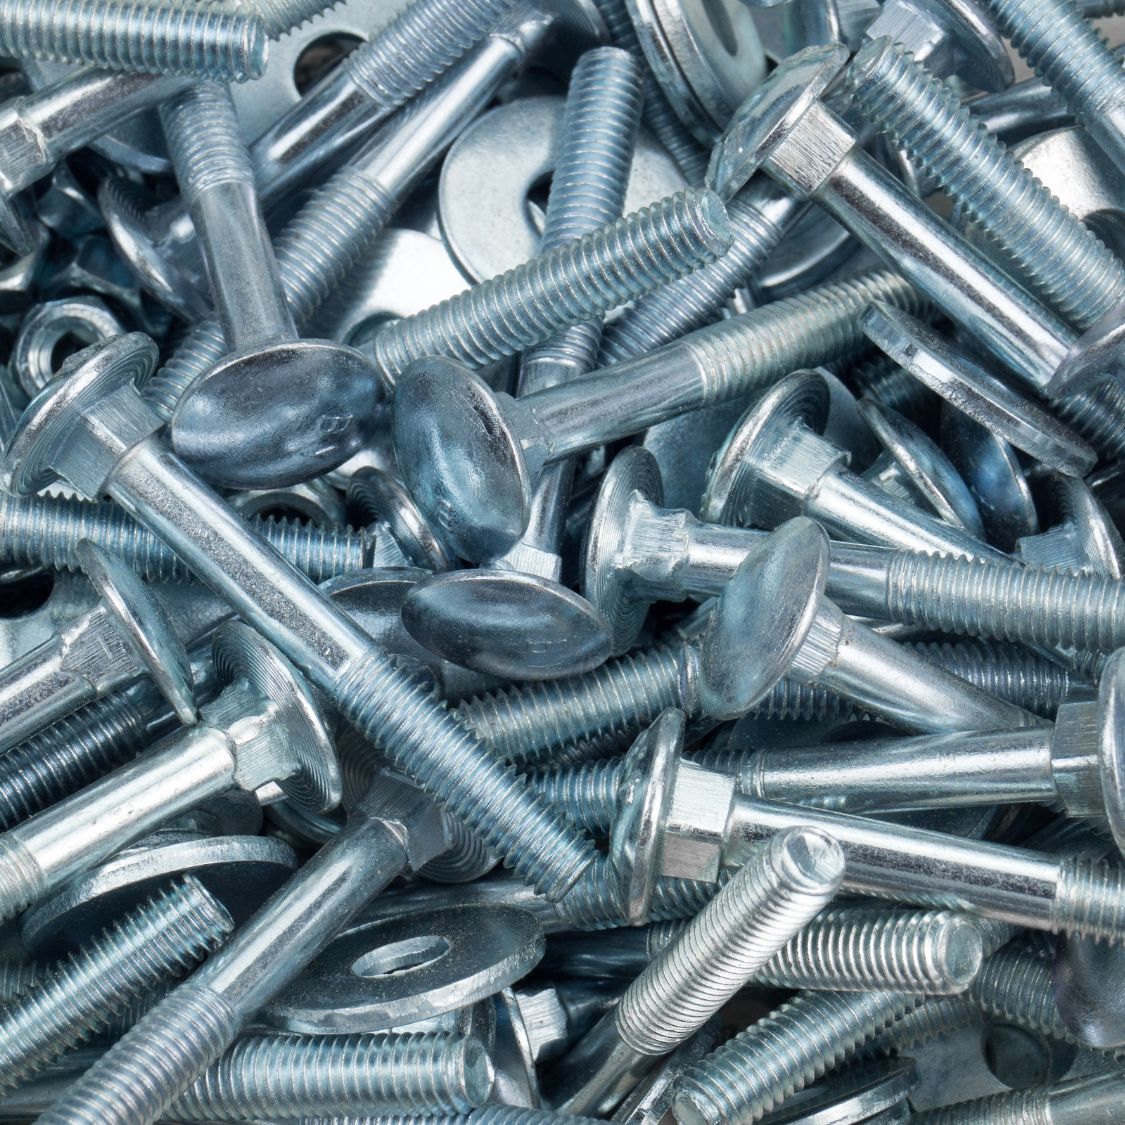 Essential Tips for Buying Fasteners Online